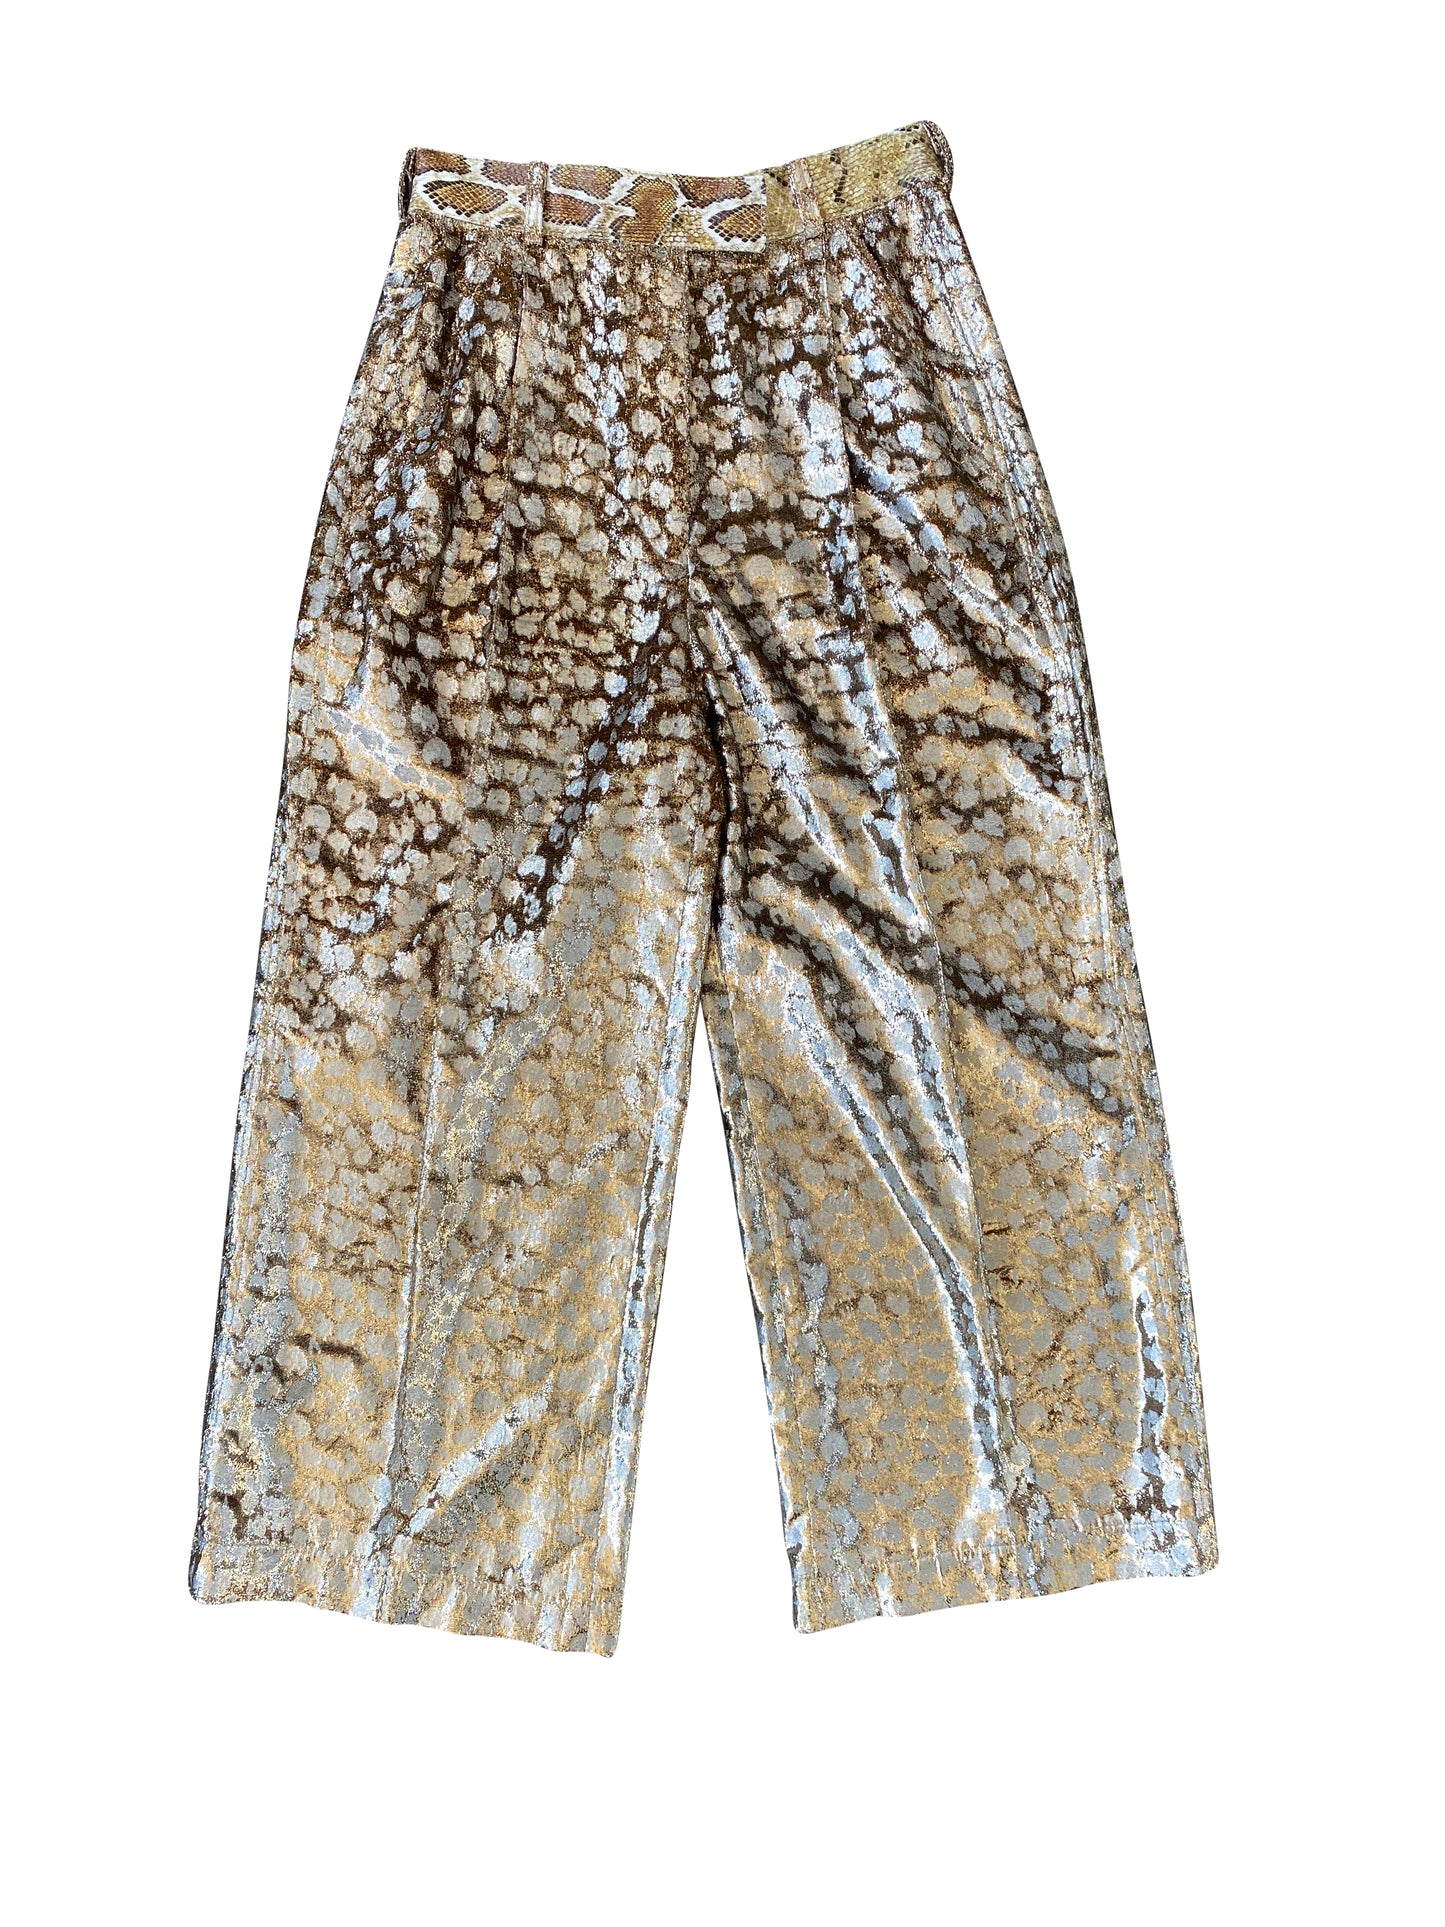 'Scintillating Gold' Vintage Lamé Tailored Trousers